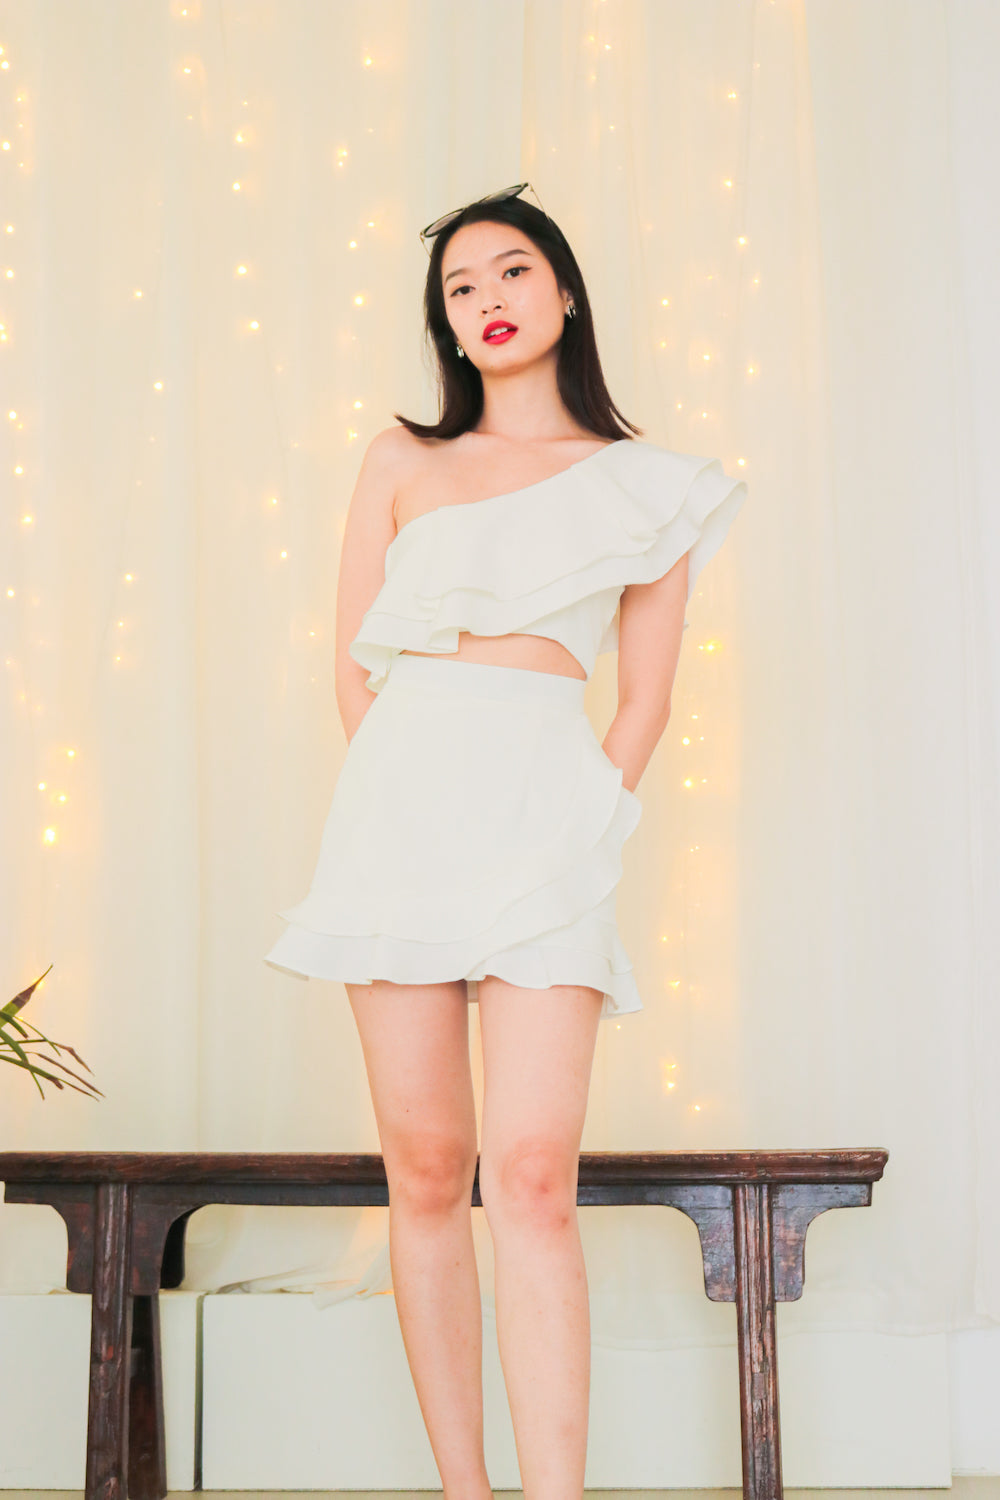 * PREMIUM * - Celeslia Ruffles Toga Top in White - Self Manufactured by LBRLABEL only